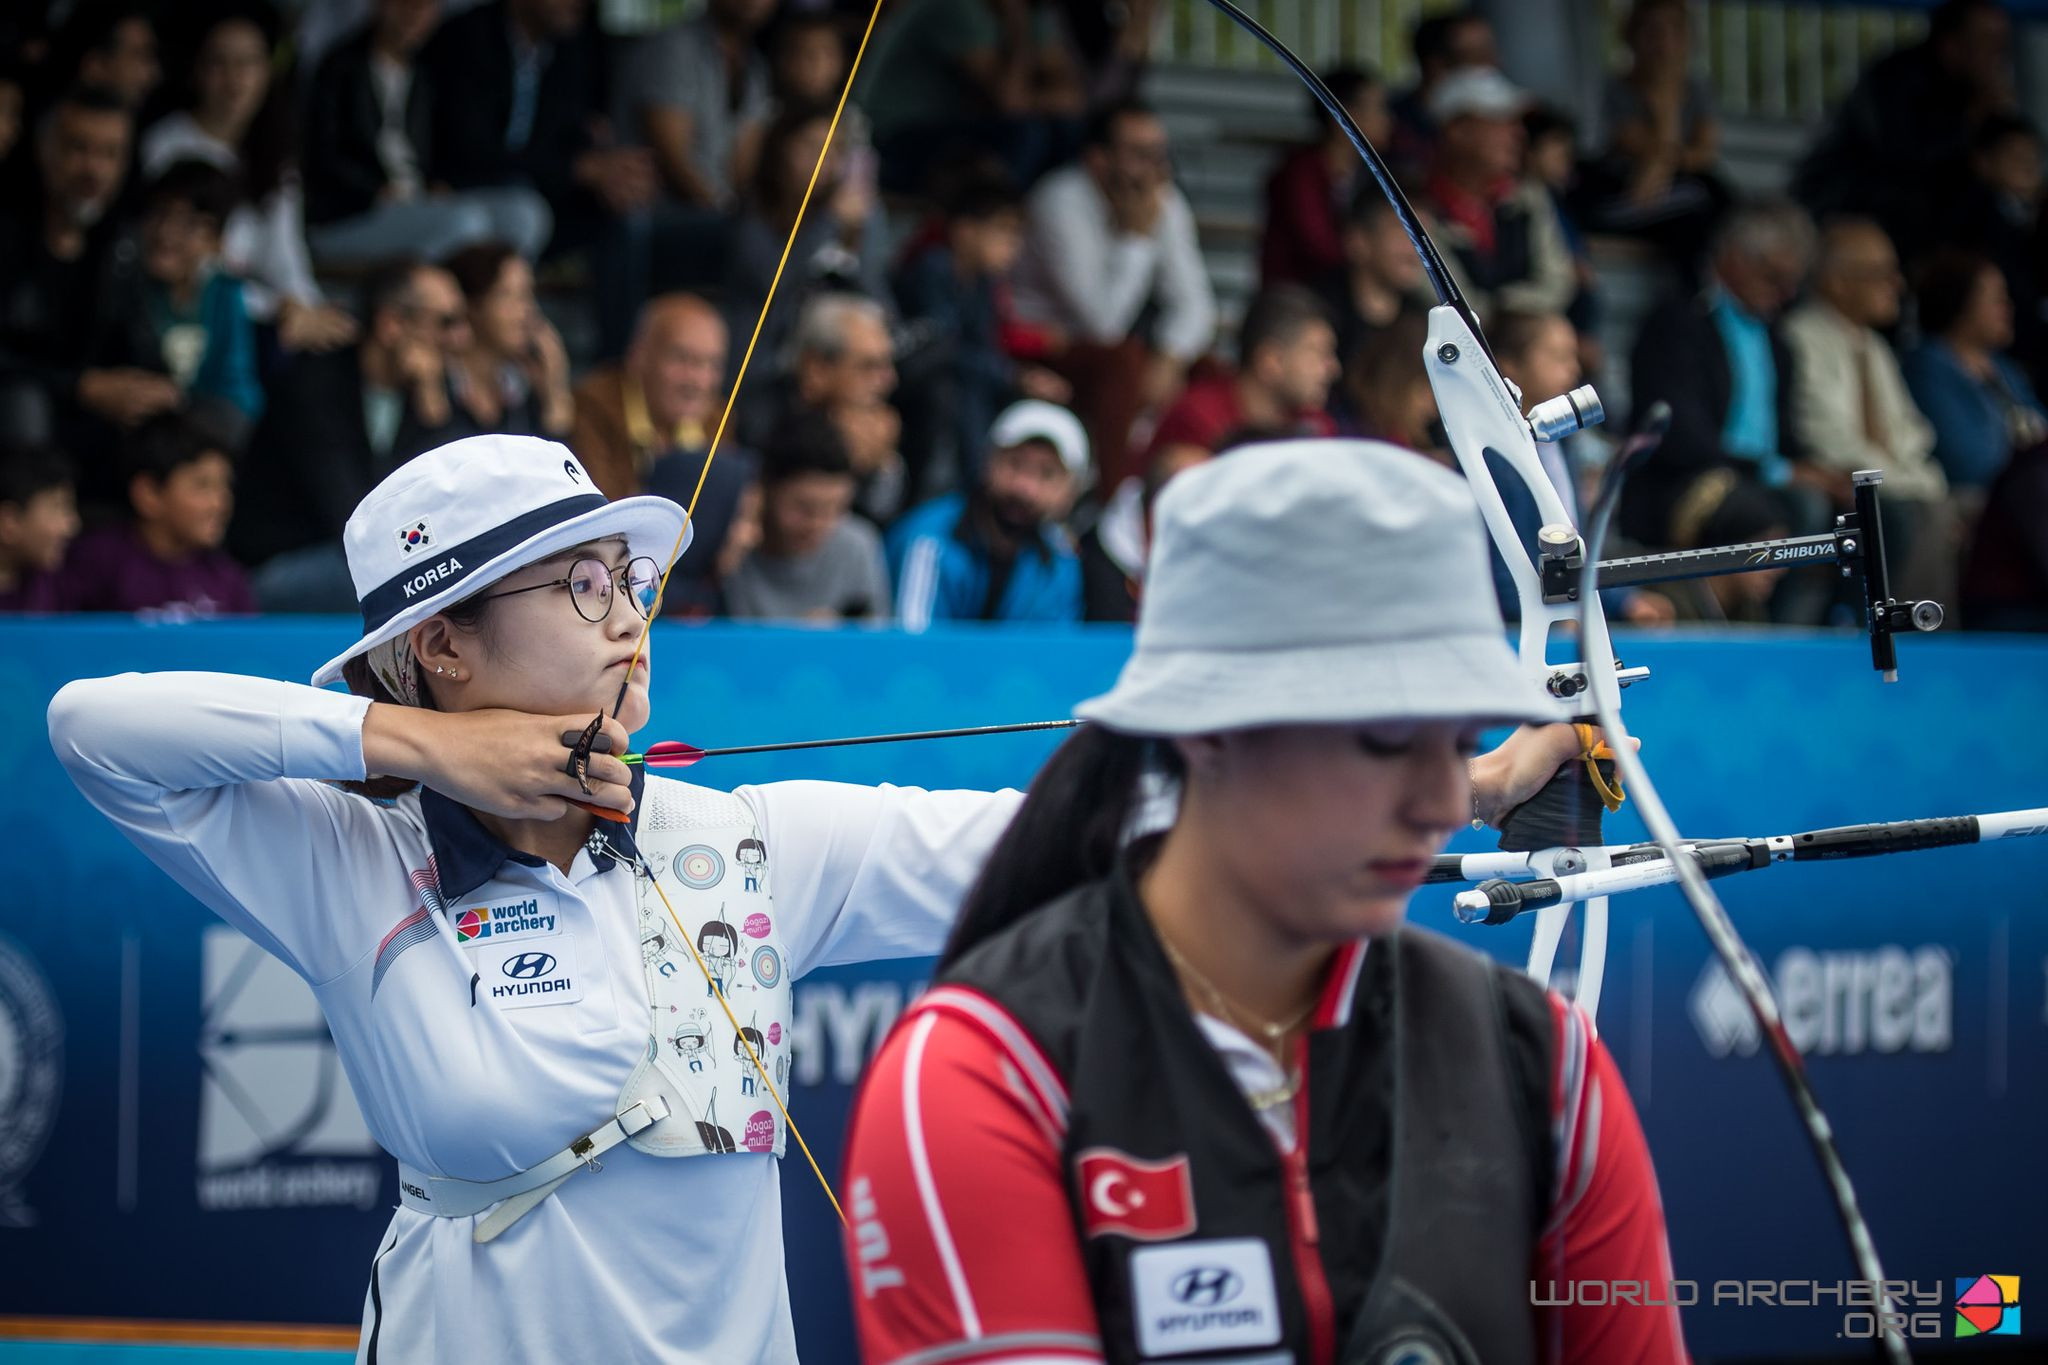 South Korea's 21-year-old Lee Eun Gyeong, left, in her debut international season, beat home archer Yasemin Anagoz in the women's recurve final at the Archery World Cup Final in Samsun, Turkey ©World Archery 